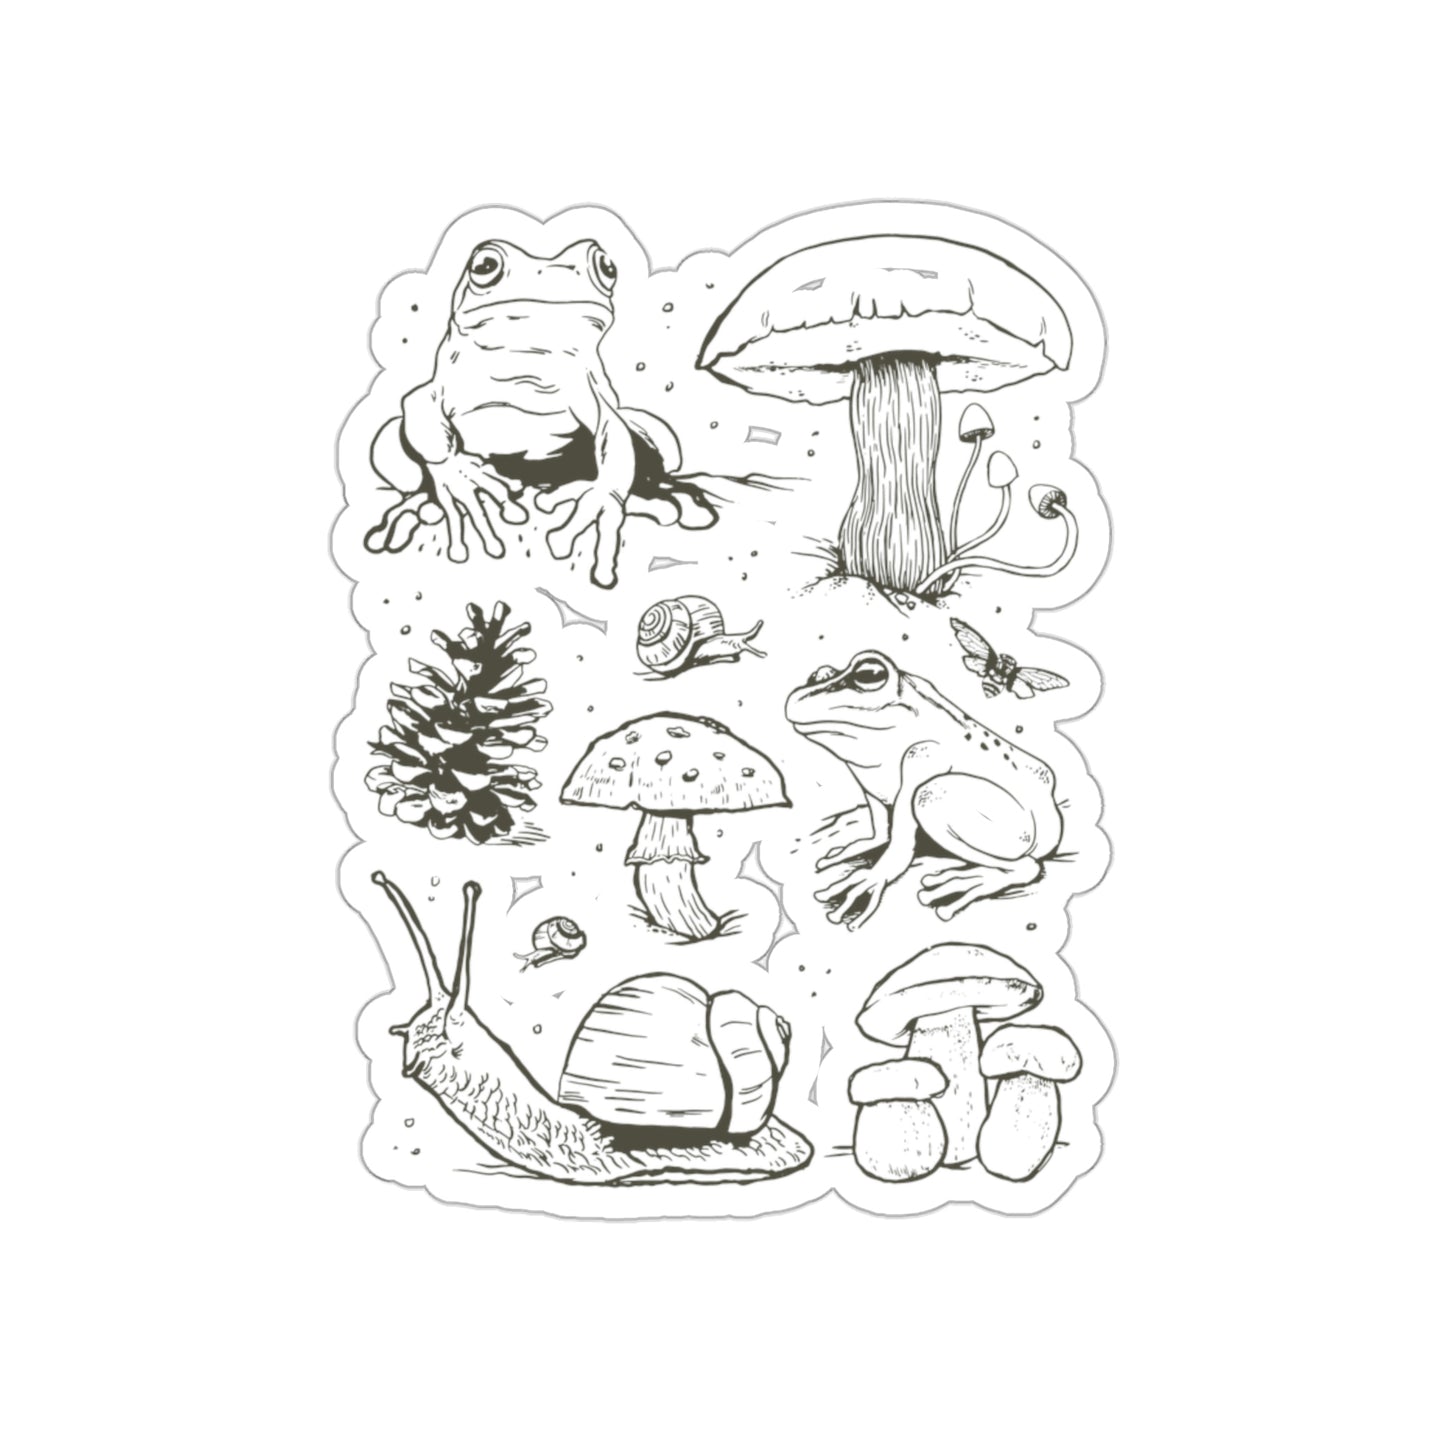 Cottagecore Aesthetic Mushrooms and Frog Hand Drawn Sticker